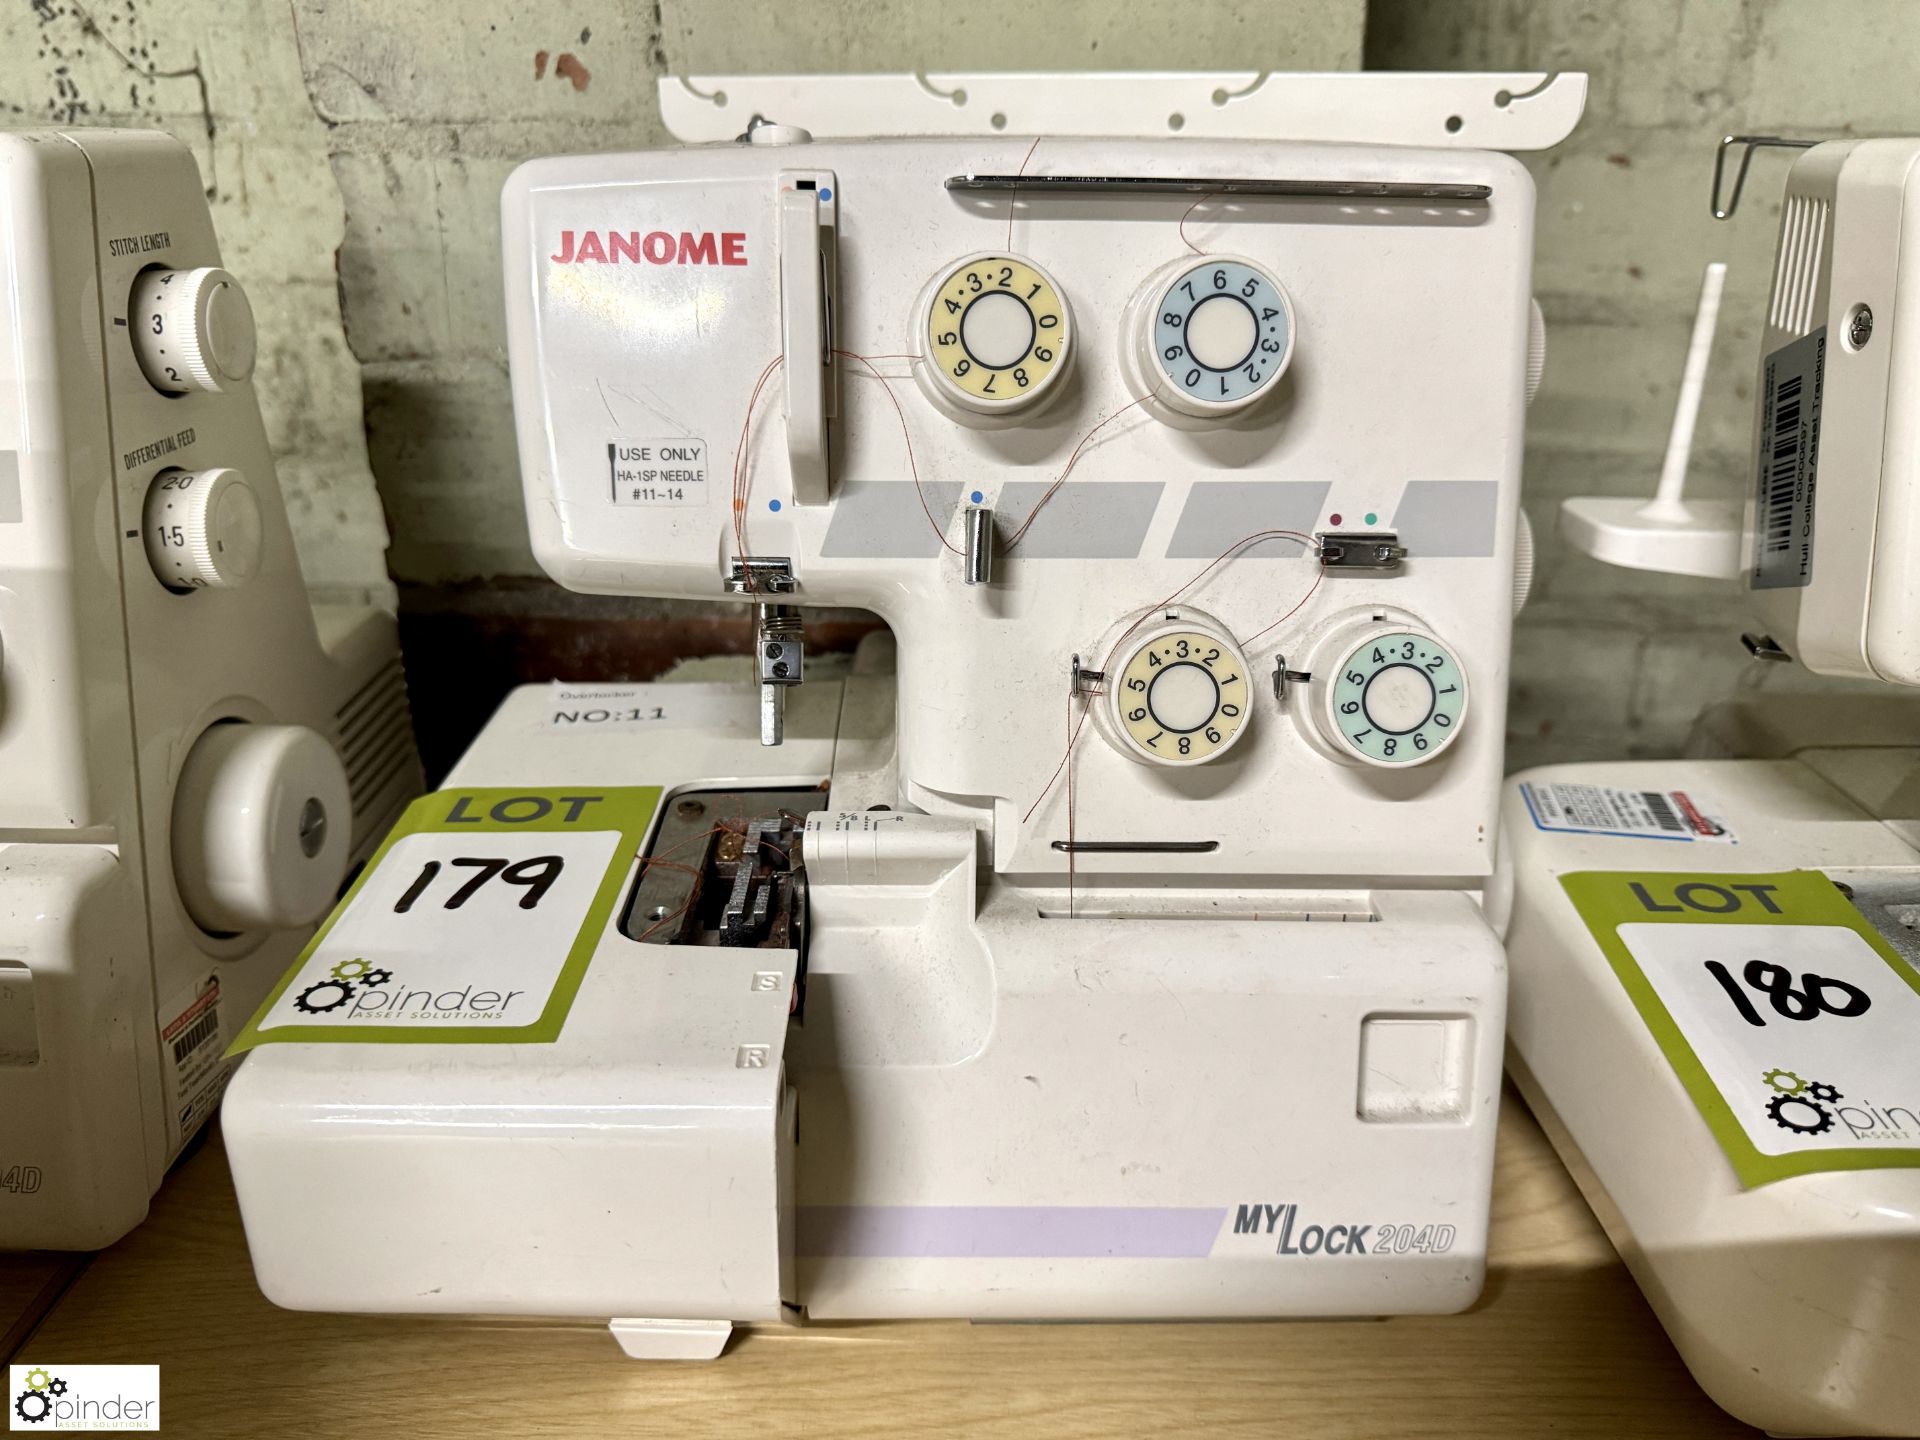 Janome MyLock 204D 4-thread Overlocker, 240volts (no power leads or foot controls)